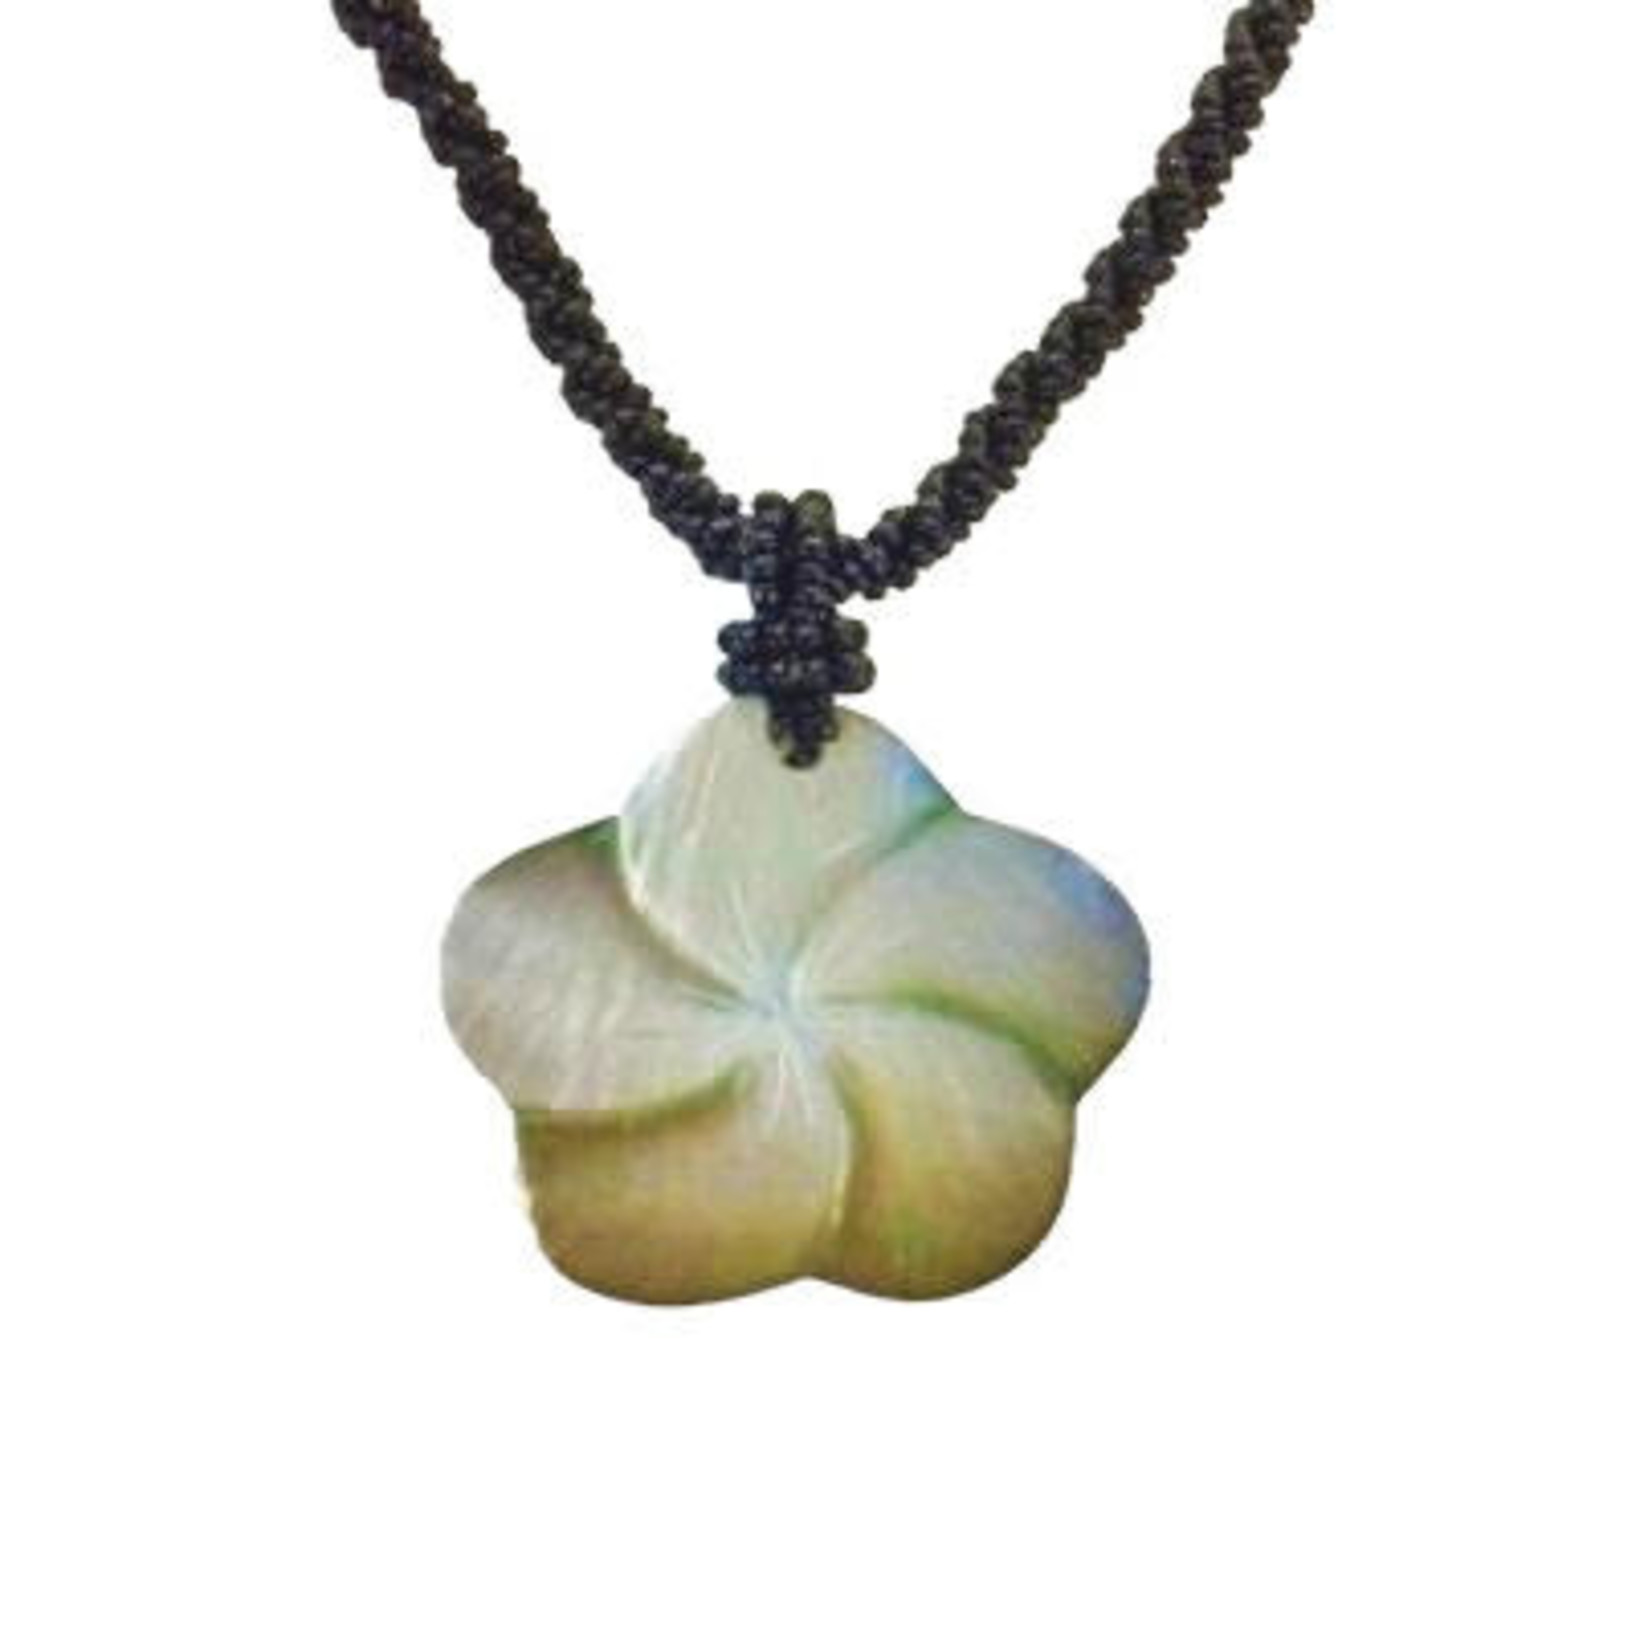 Shell Necklace Carved Flower with Black Beads - NB1